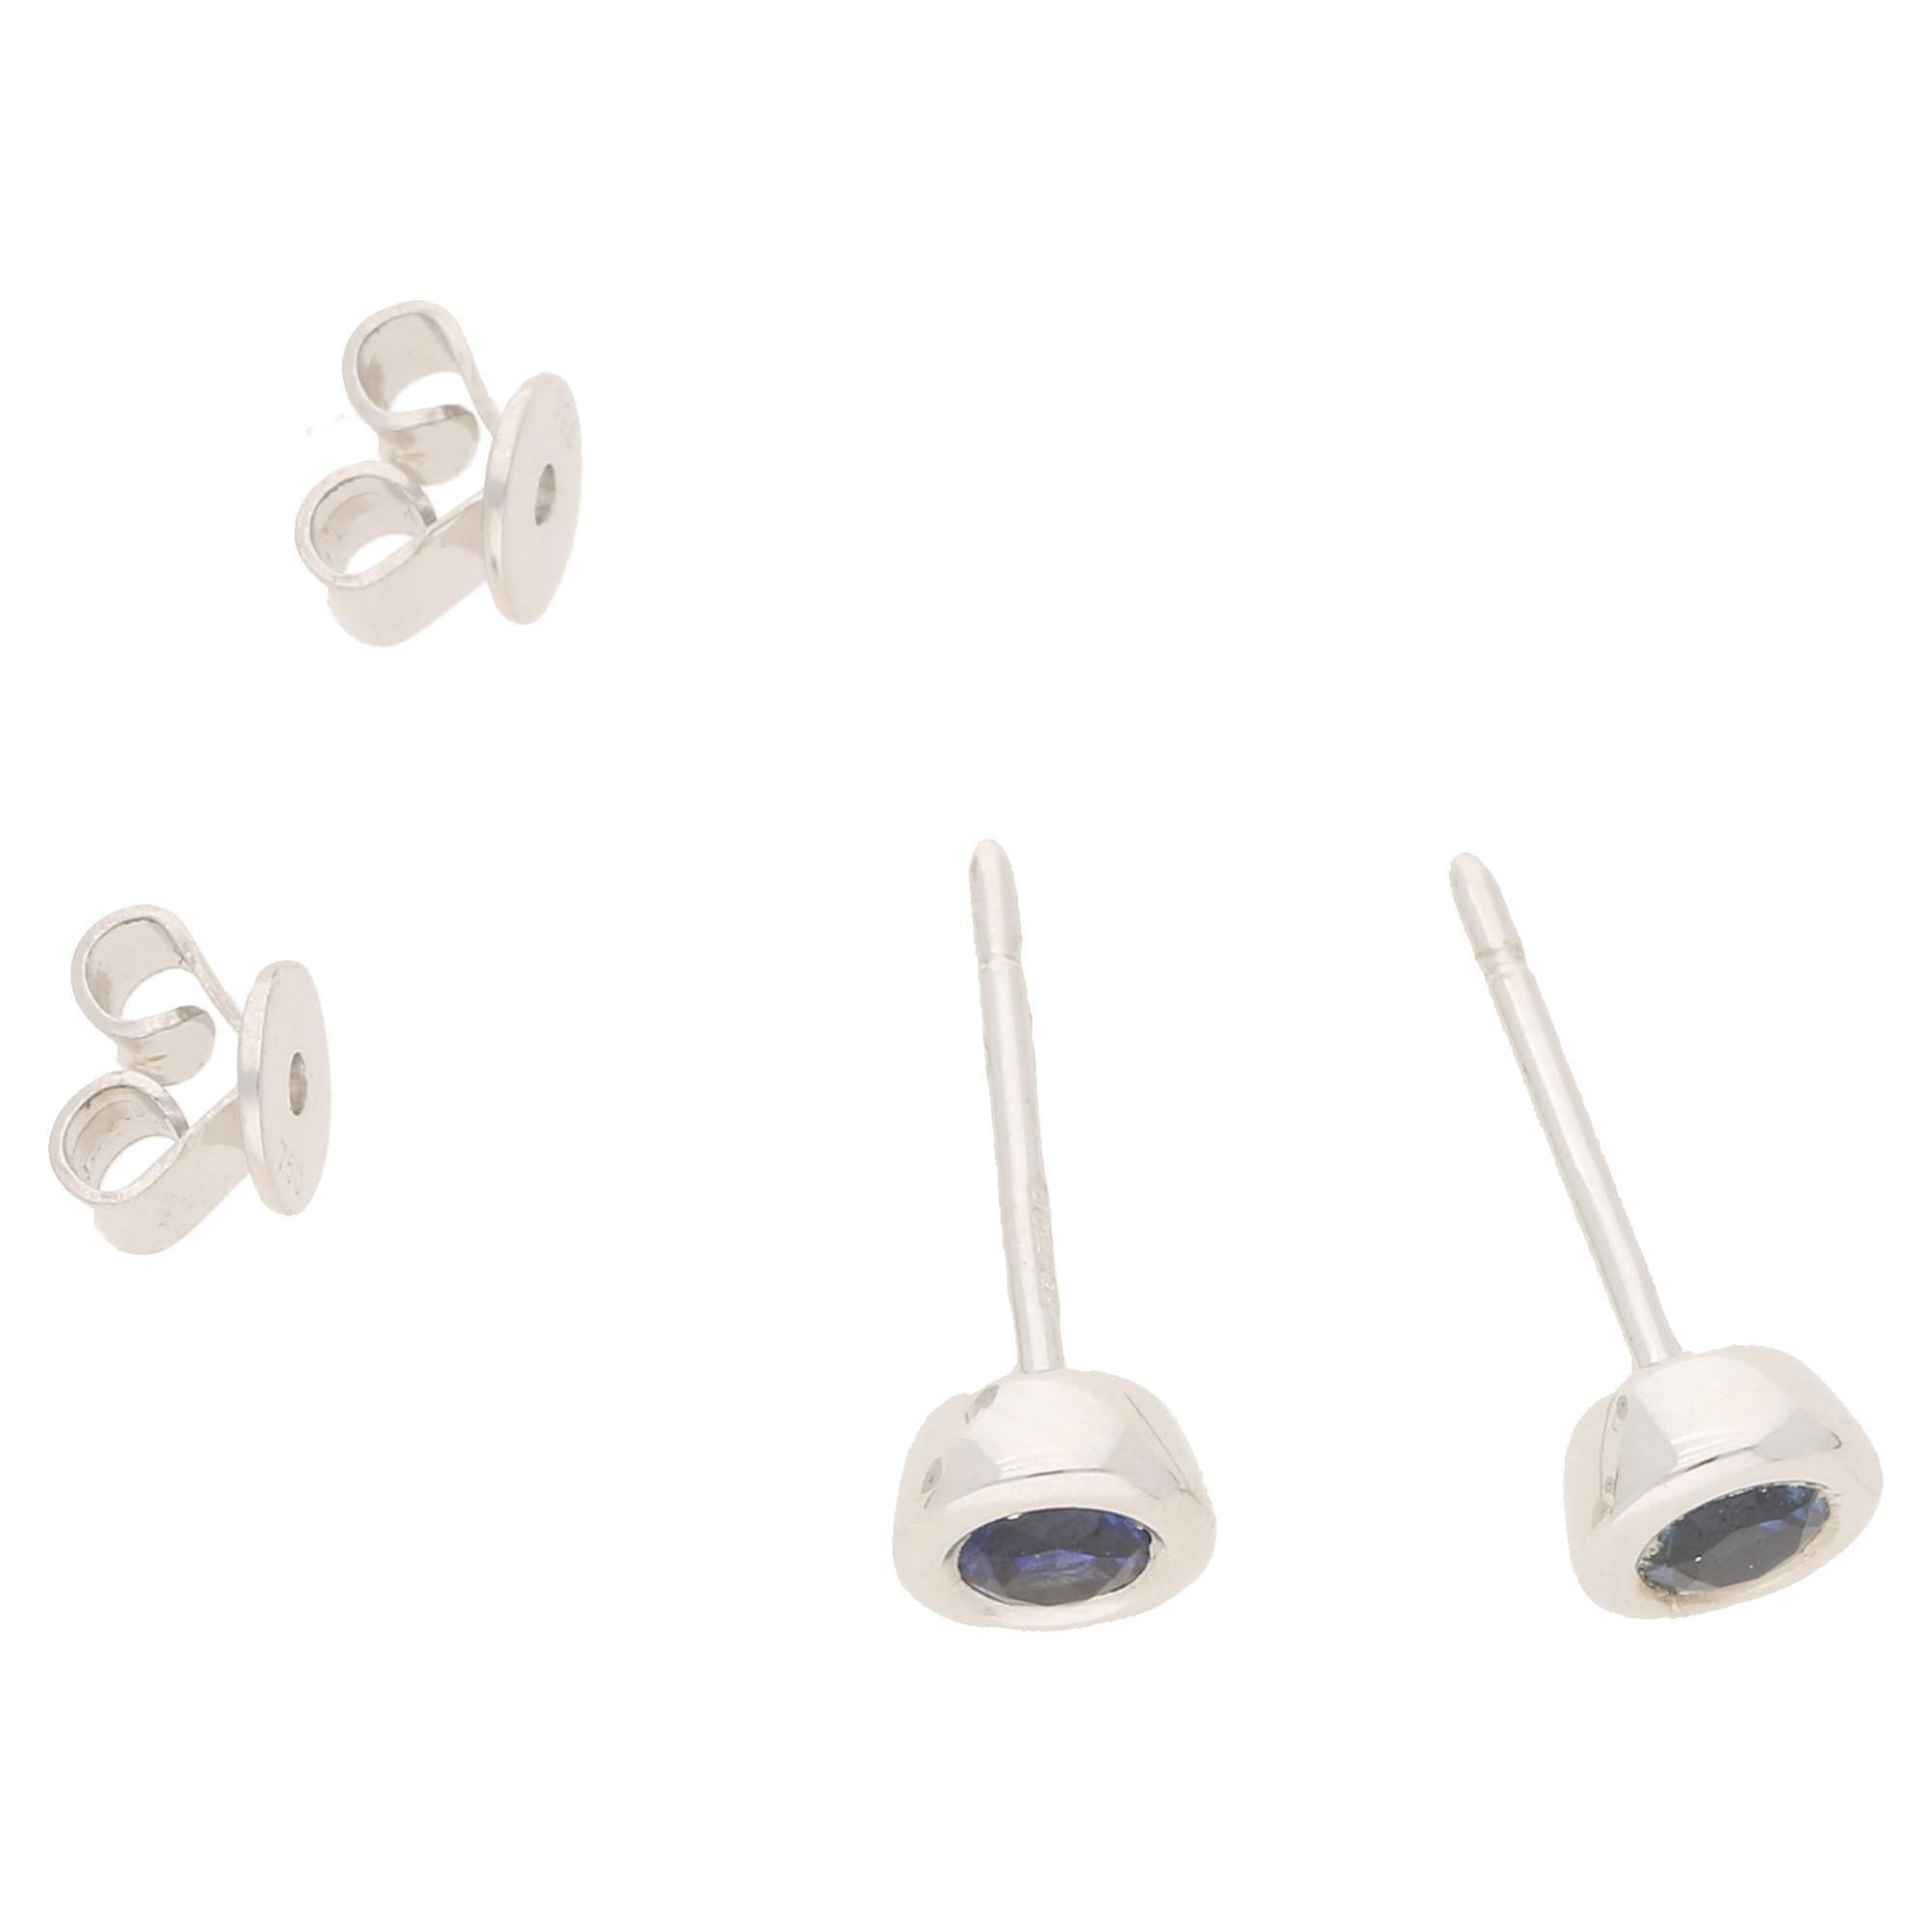 A pair of simple collet set sapphire stud earrings in 18k white gold. The sapphires total 0.36ct's and are a deep blue.The studs measure 5mm across. On post and butterfly back fittings.